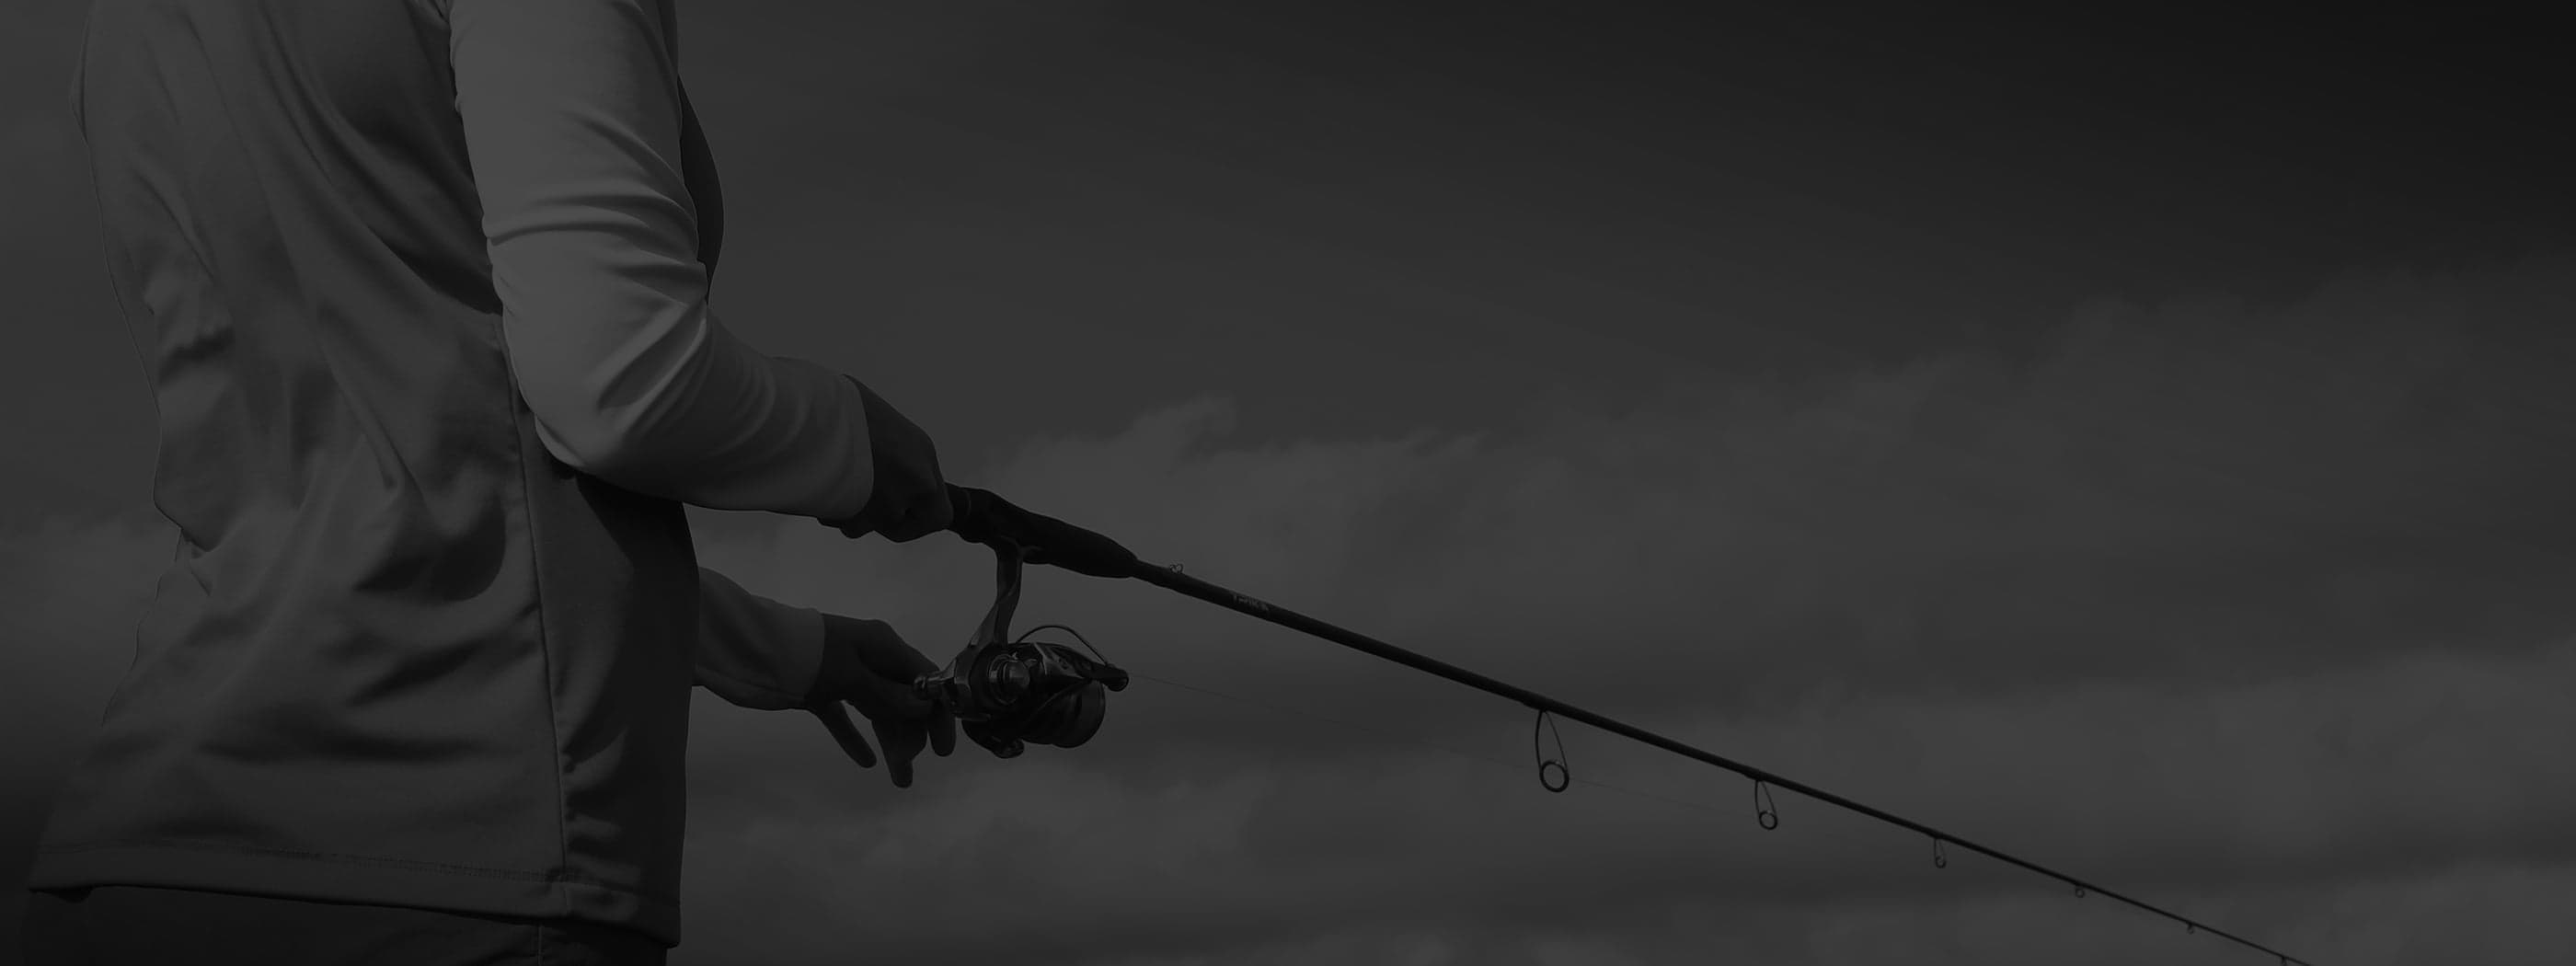 Close up of an angler reeling in a fish using a Trika fishing rod standing up on a boat